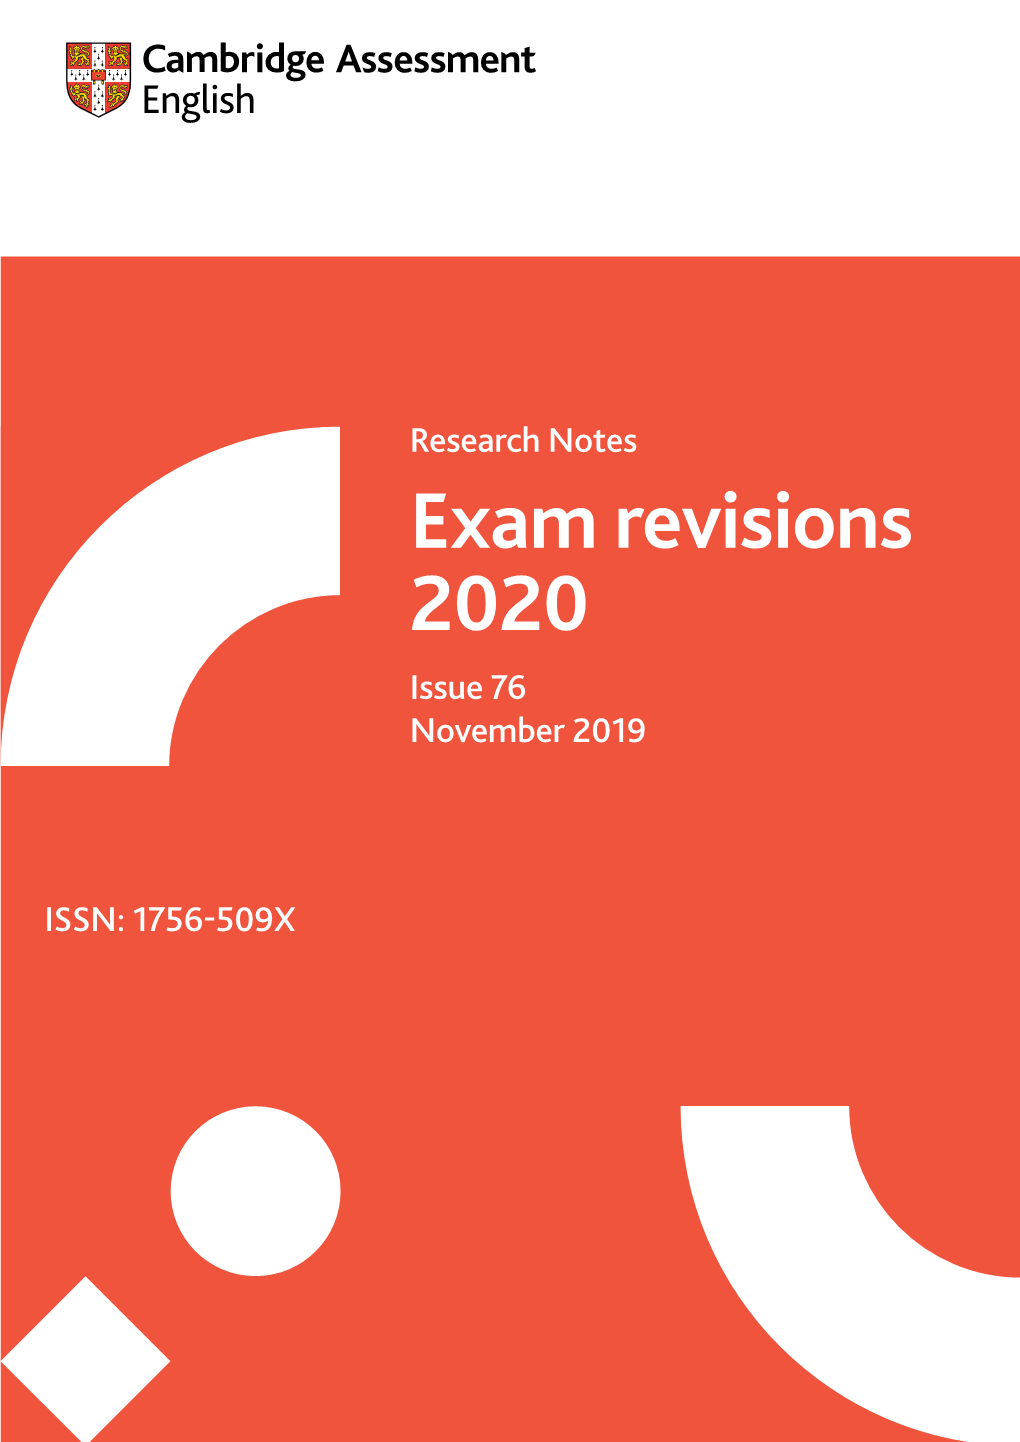 Research Notes 76